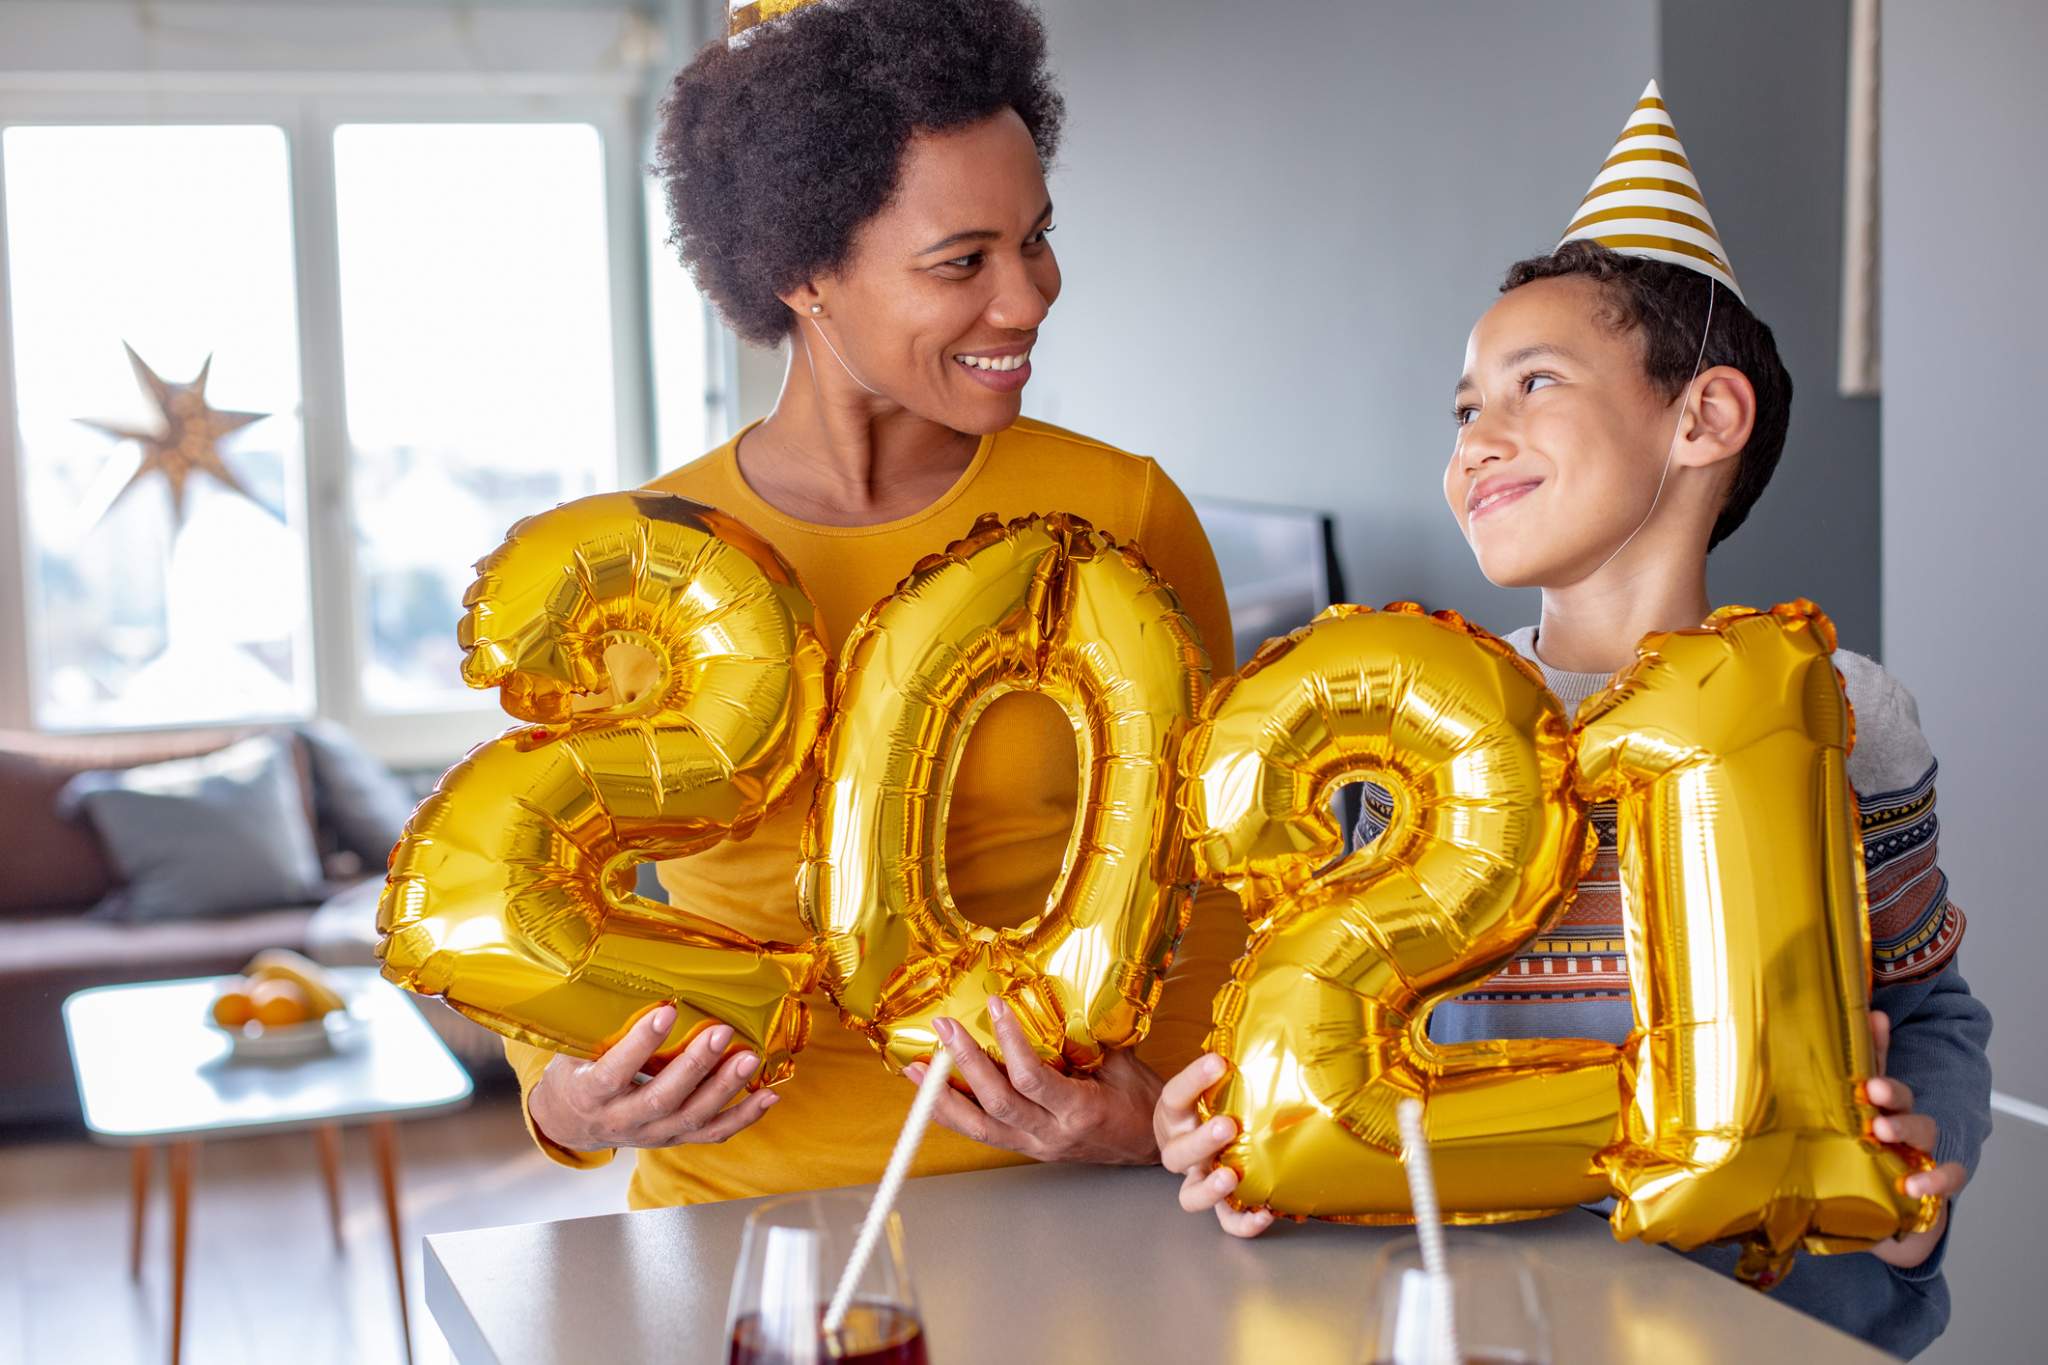 Mom & young son wear festive hats and hold ‘2021’ balloons at home to take New Year’s Eve pictures.